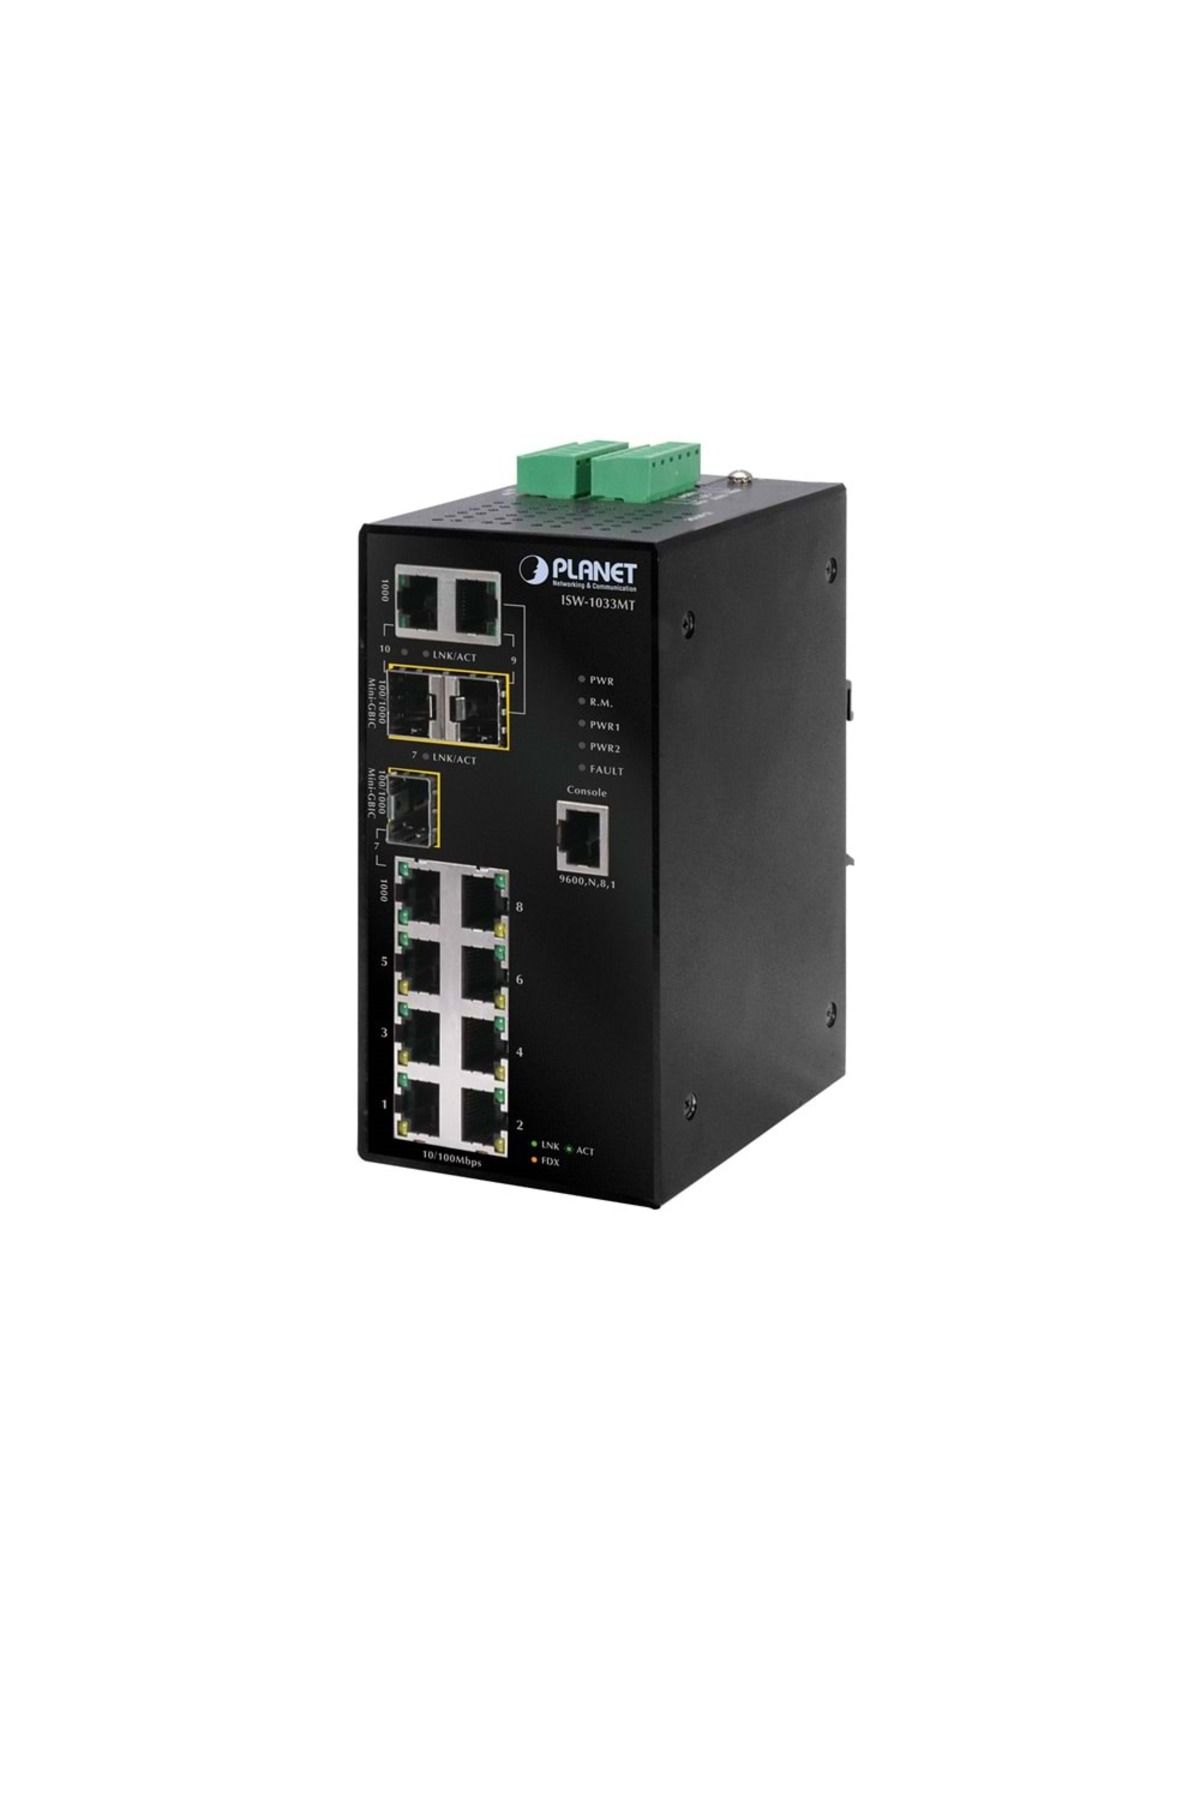 Planet IP30  SNMP 7-Port/TP + 3-Port Gigabit Combo Industrial Ethernet Switch (-40 to 75 degree C)